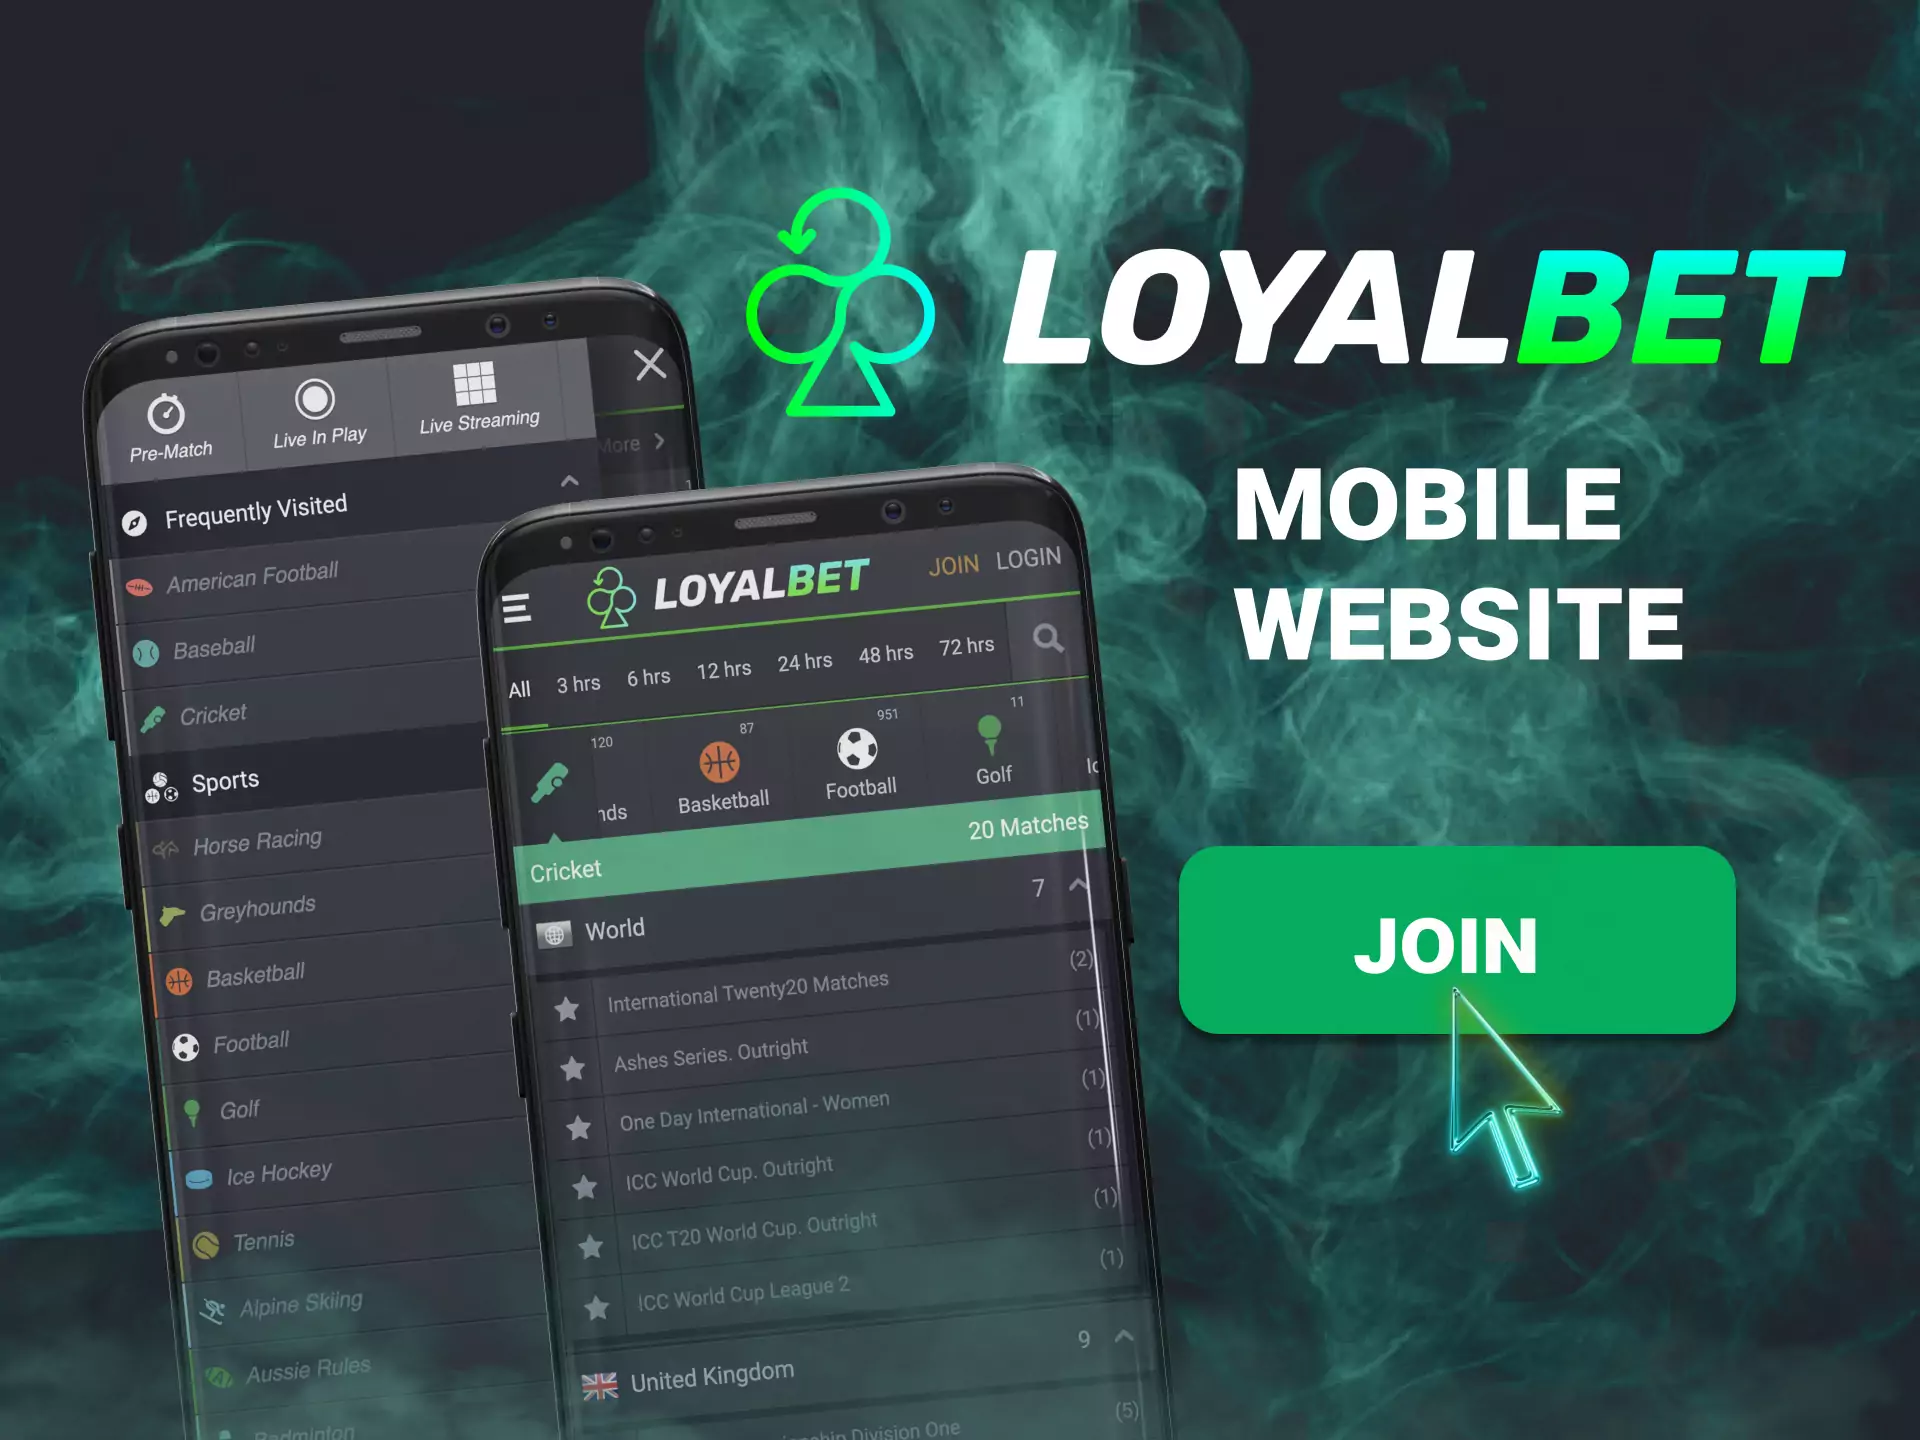 From mobile devices, you can use the browser version of the Loyalbet website.